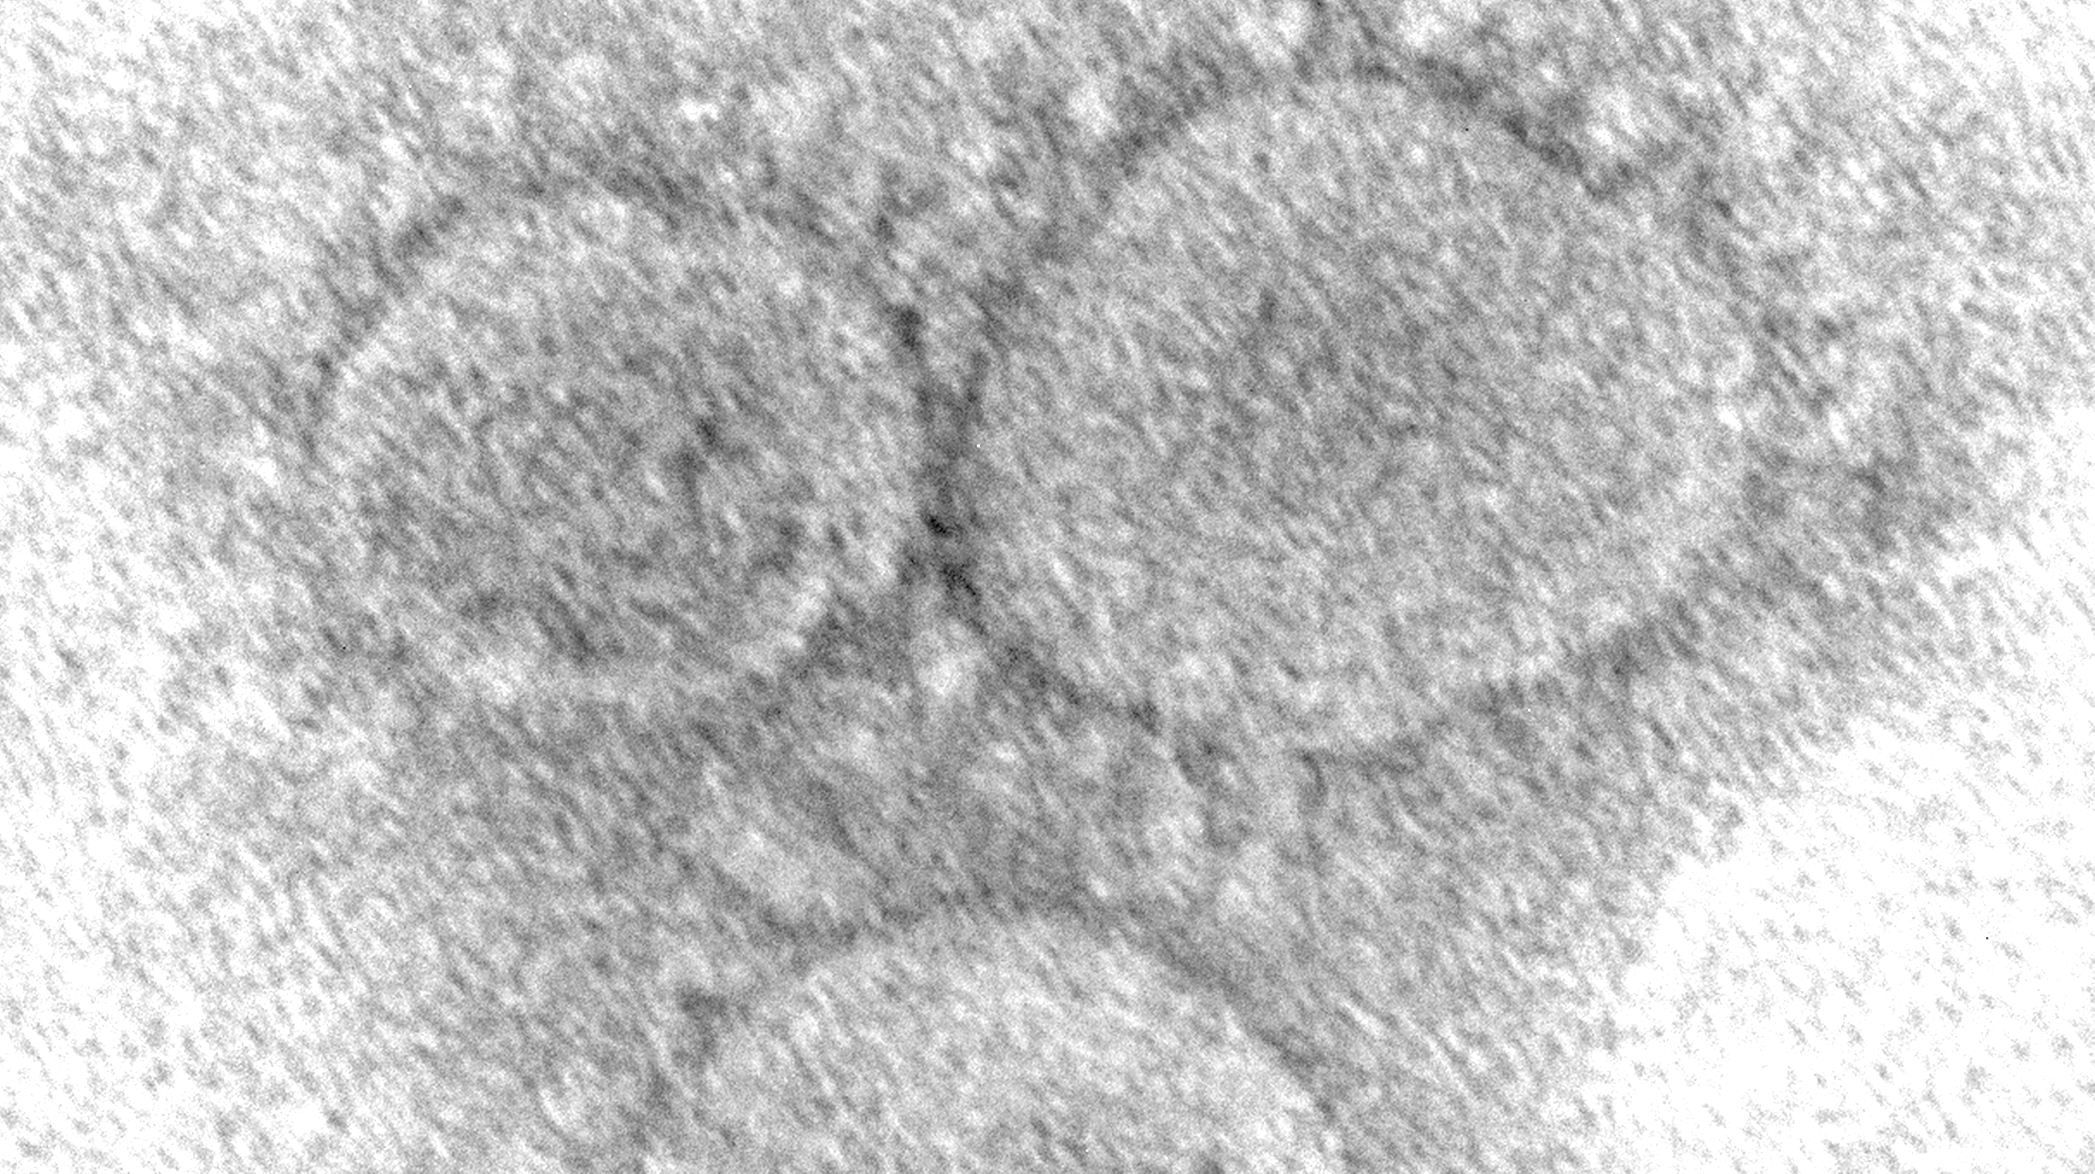 An electron microscopic image of SARS-CoV-2, the virus that causes covid-19  (Image: CDC/ Hannah A. Bullock and Azaibi Tamin)